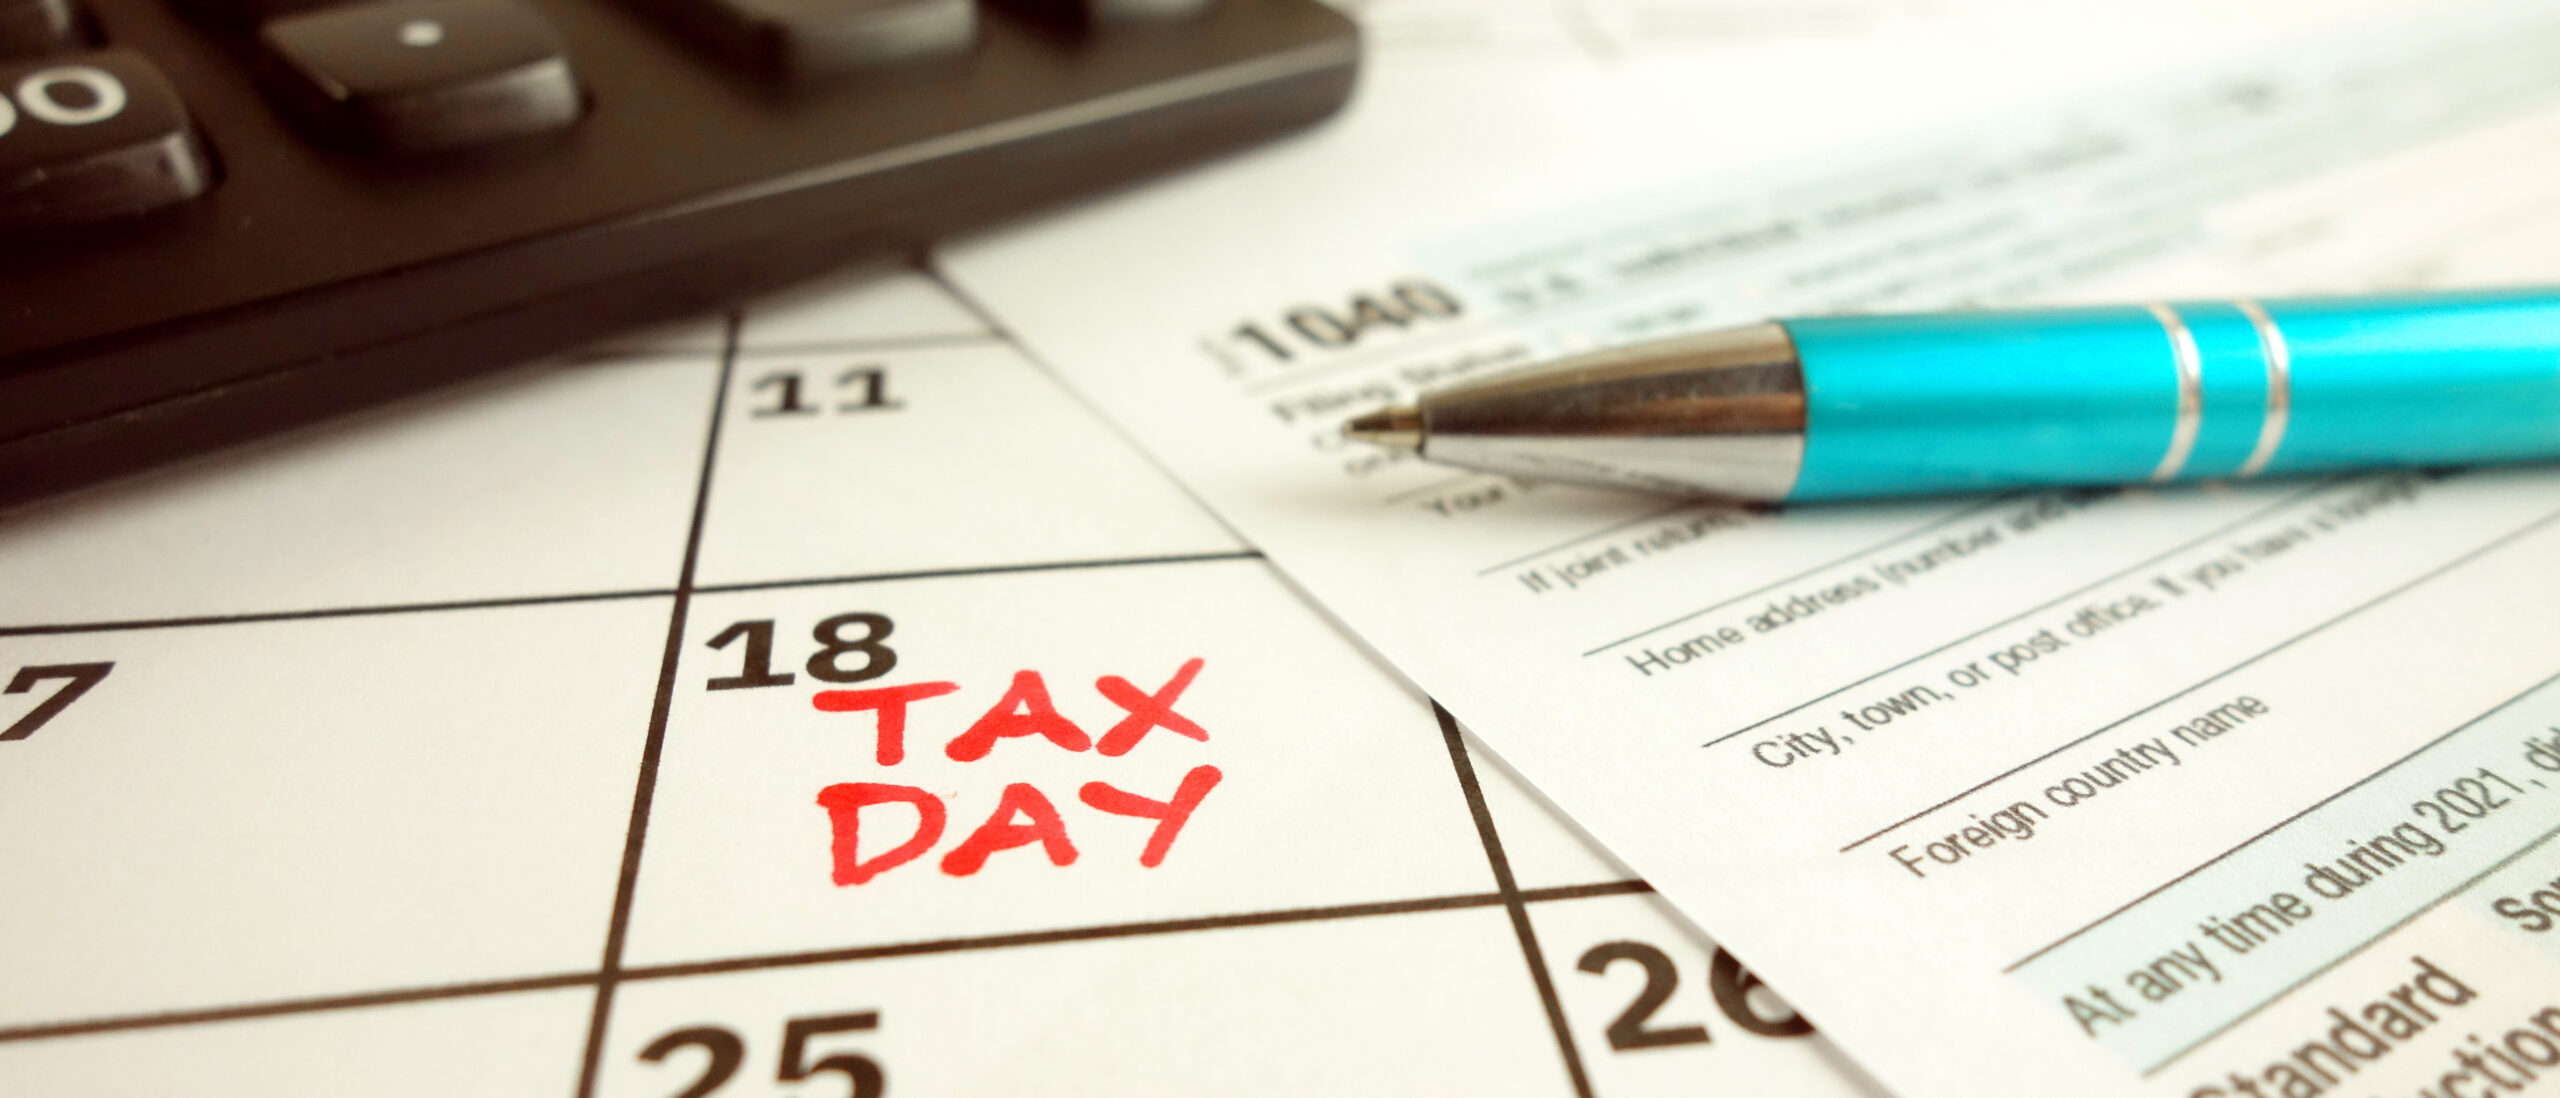 8-facts-about-tax-day-april-15th